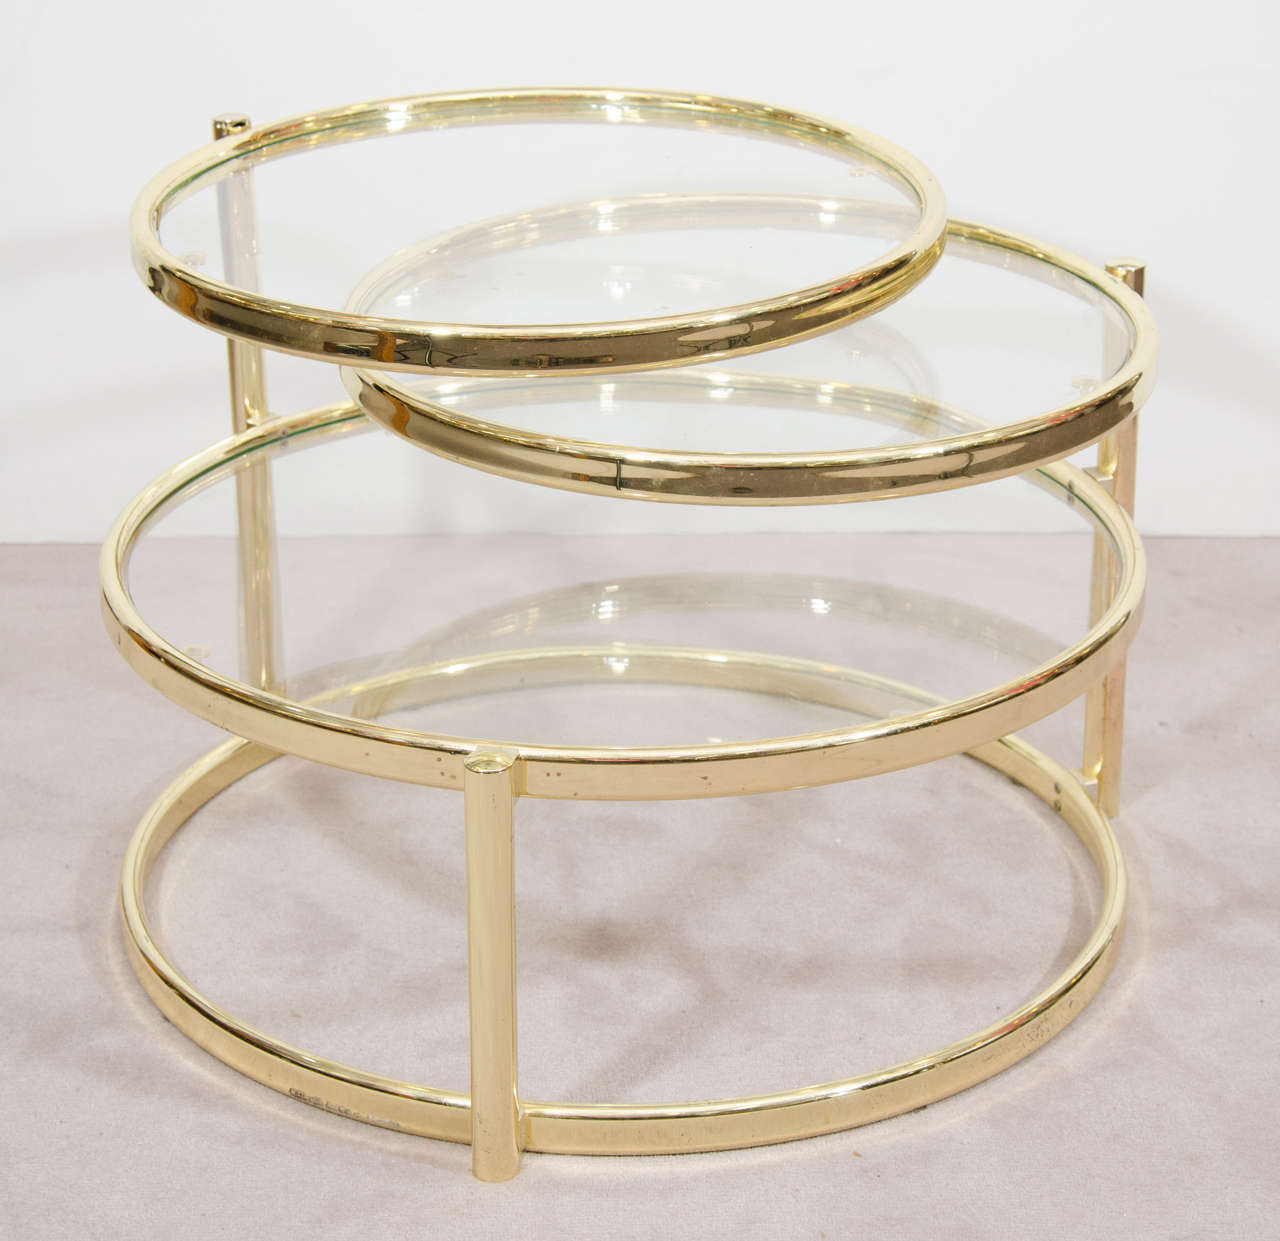 A vintage Milo Baughman inspired three-tier brass and glass swivel coffee table or cocktail table. The top two tiers of this versatile table pivot to expand to a width of 62 inches. It can function as a side table when closed or a coffee table when